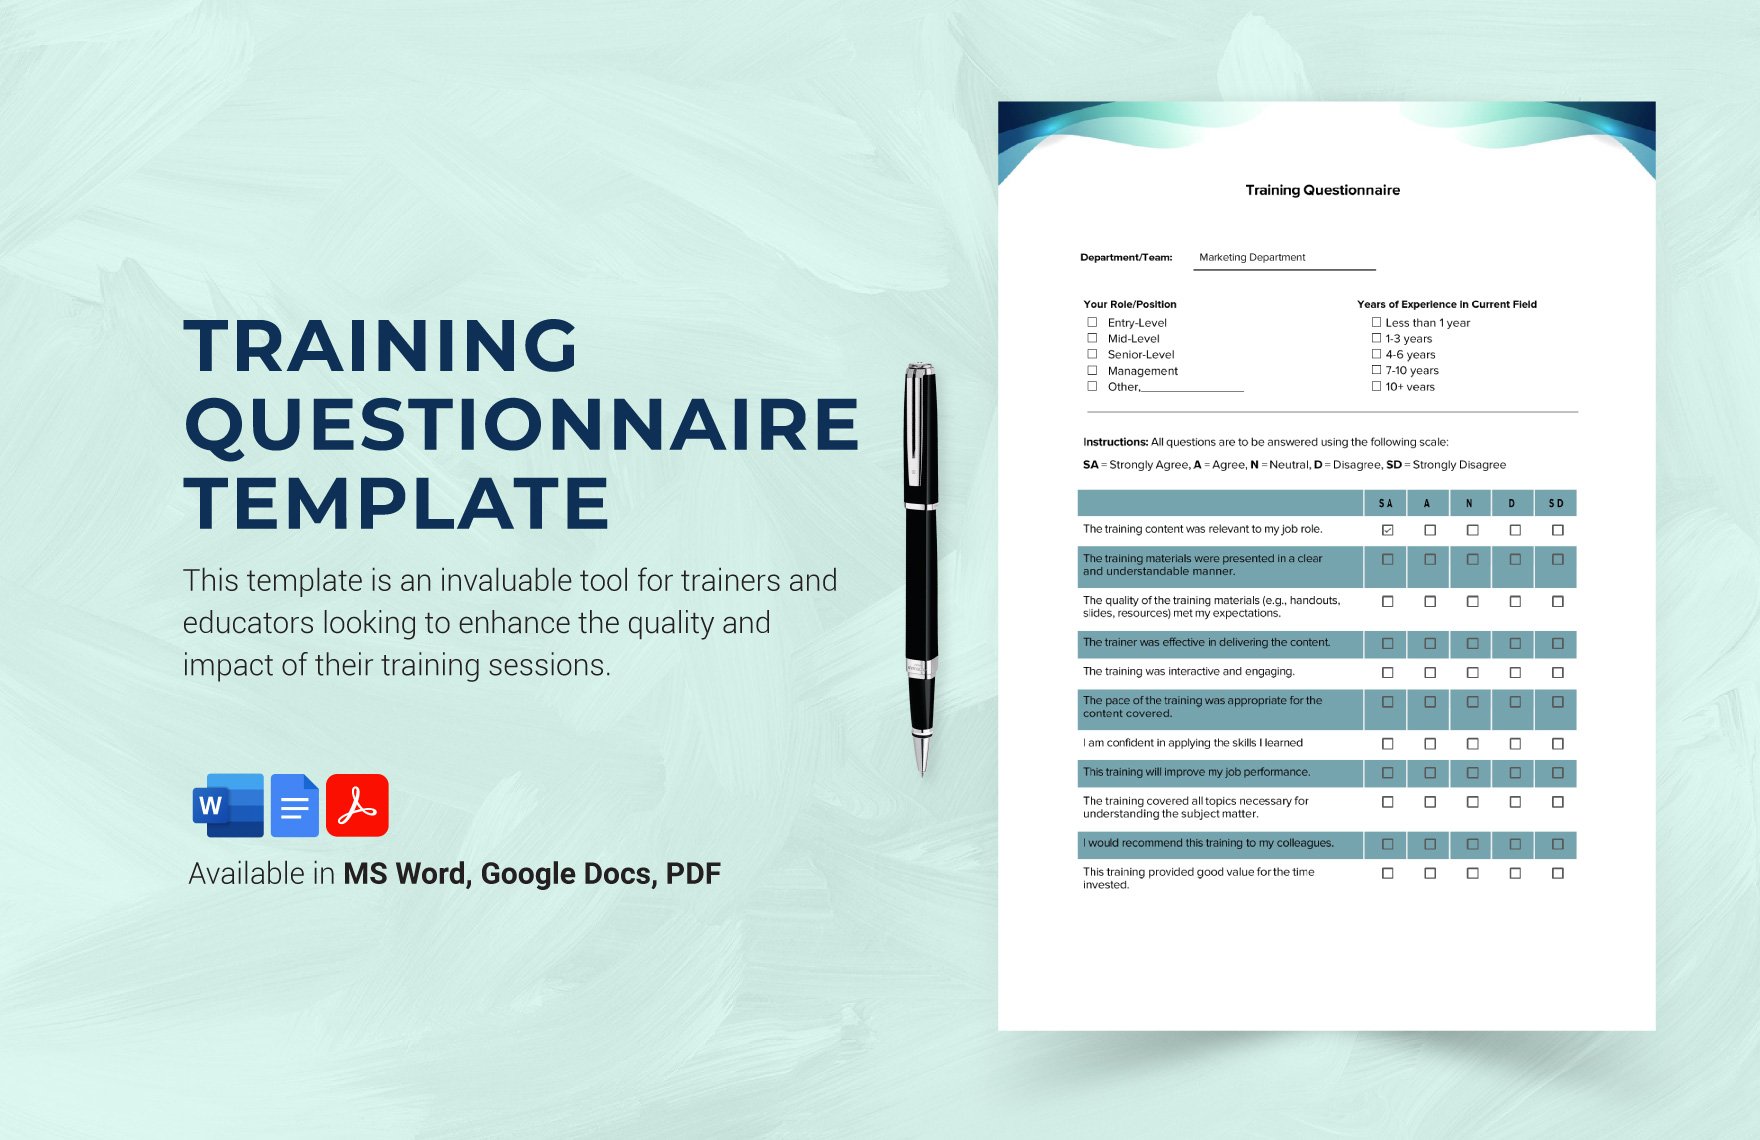 Free Training Questionnaire Template in Word, Google Docs, PDF